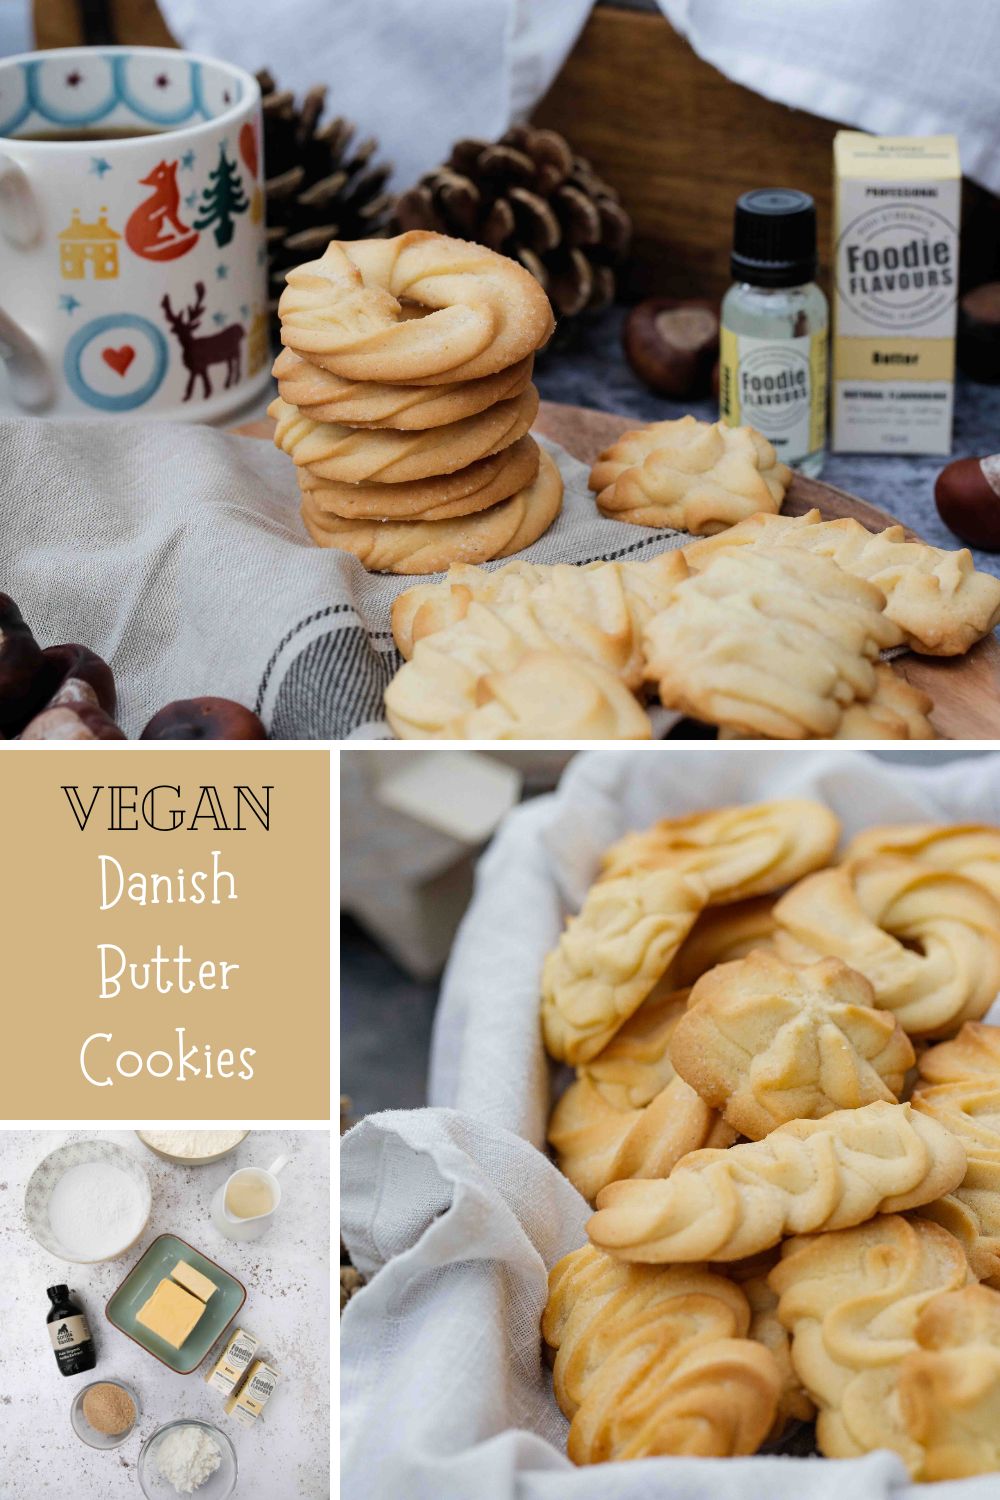 Light, crisp and delicate, my vegan version of the classic Danish Butter Cookie makes absolutely melt in the mouth delicious cookies! Just a few ingredients are needed for this simple vegan recipe that makes quite a few biscuits - perfect if you're looking for a homemade gift idea! | Recipe on thecookandhim.com #vegancookies #veganbaking #buttercookies #veganbuttercookies #danishbuttercookies #easyvegancookies #ediblegiftideas #christmascookies #veganchristmascookies